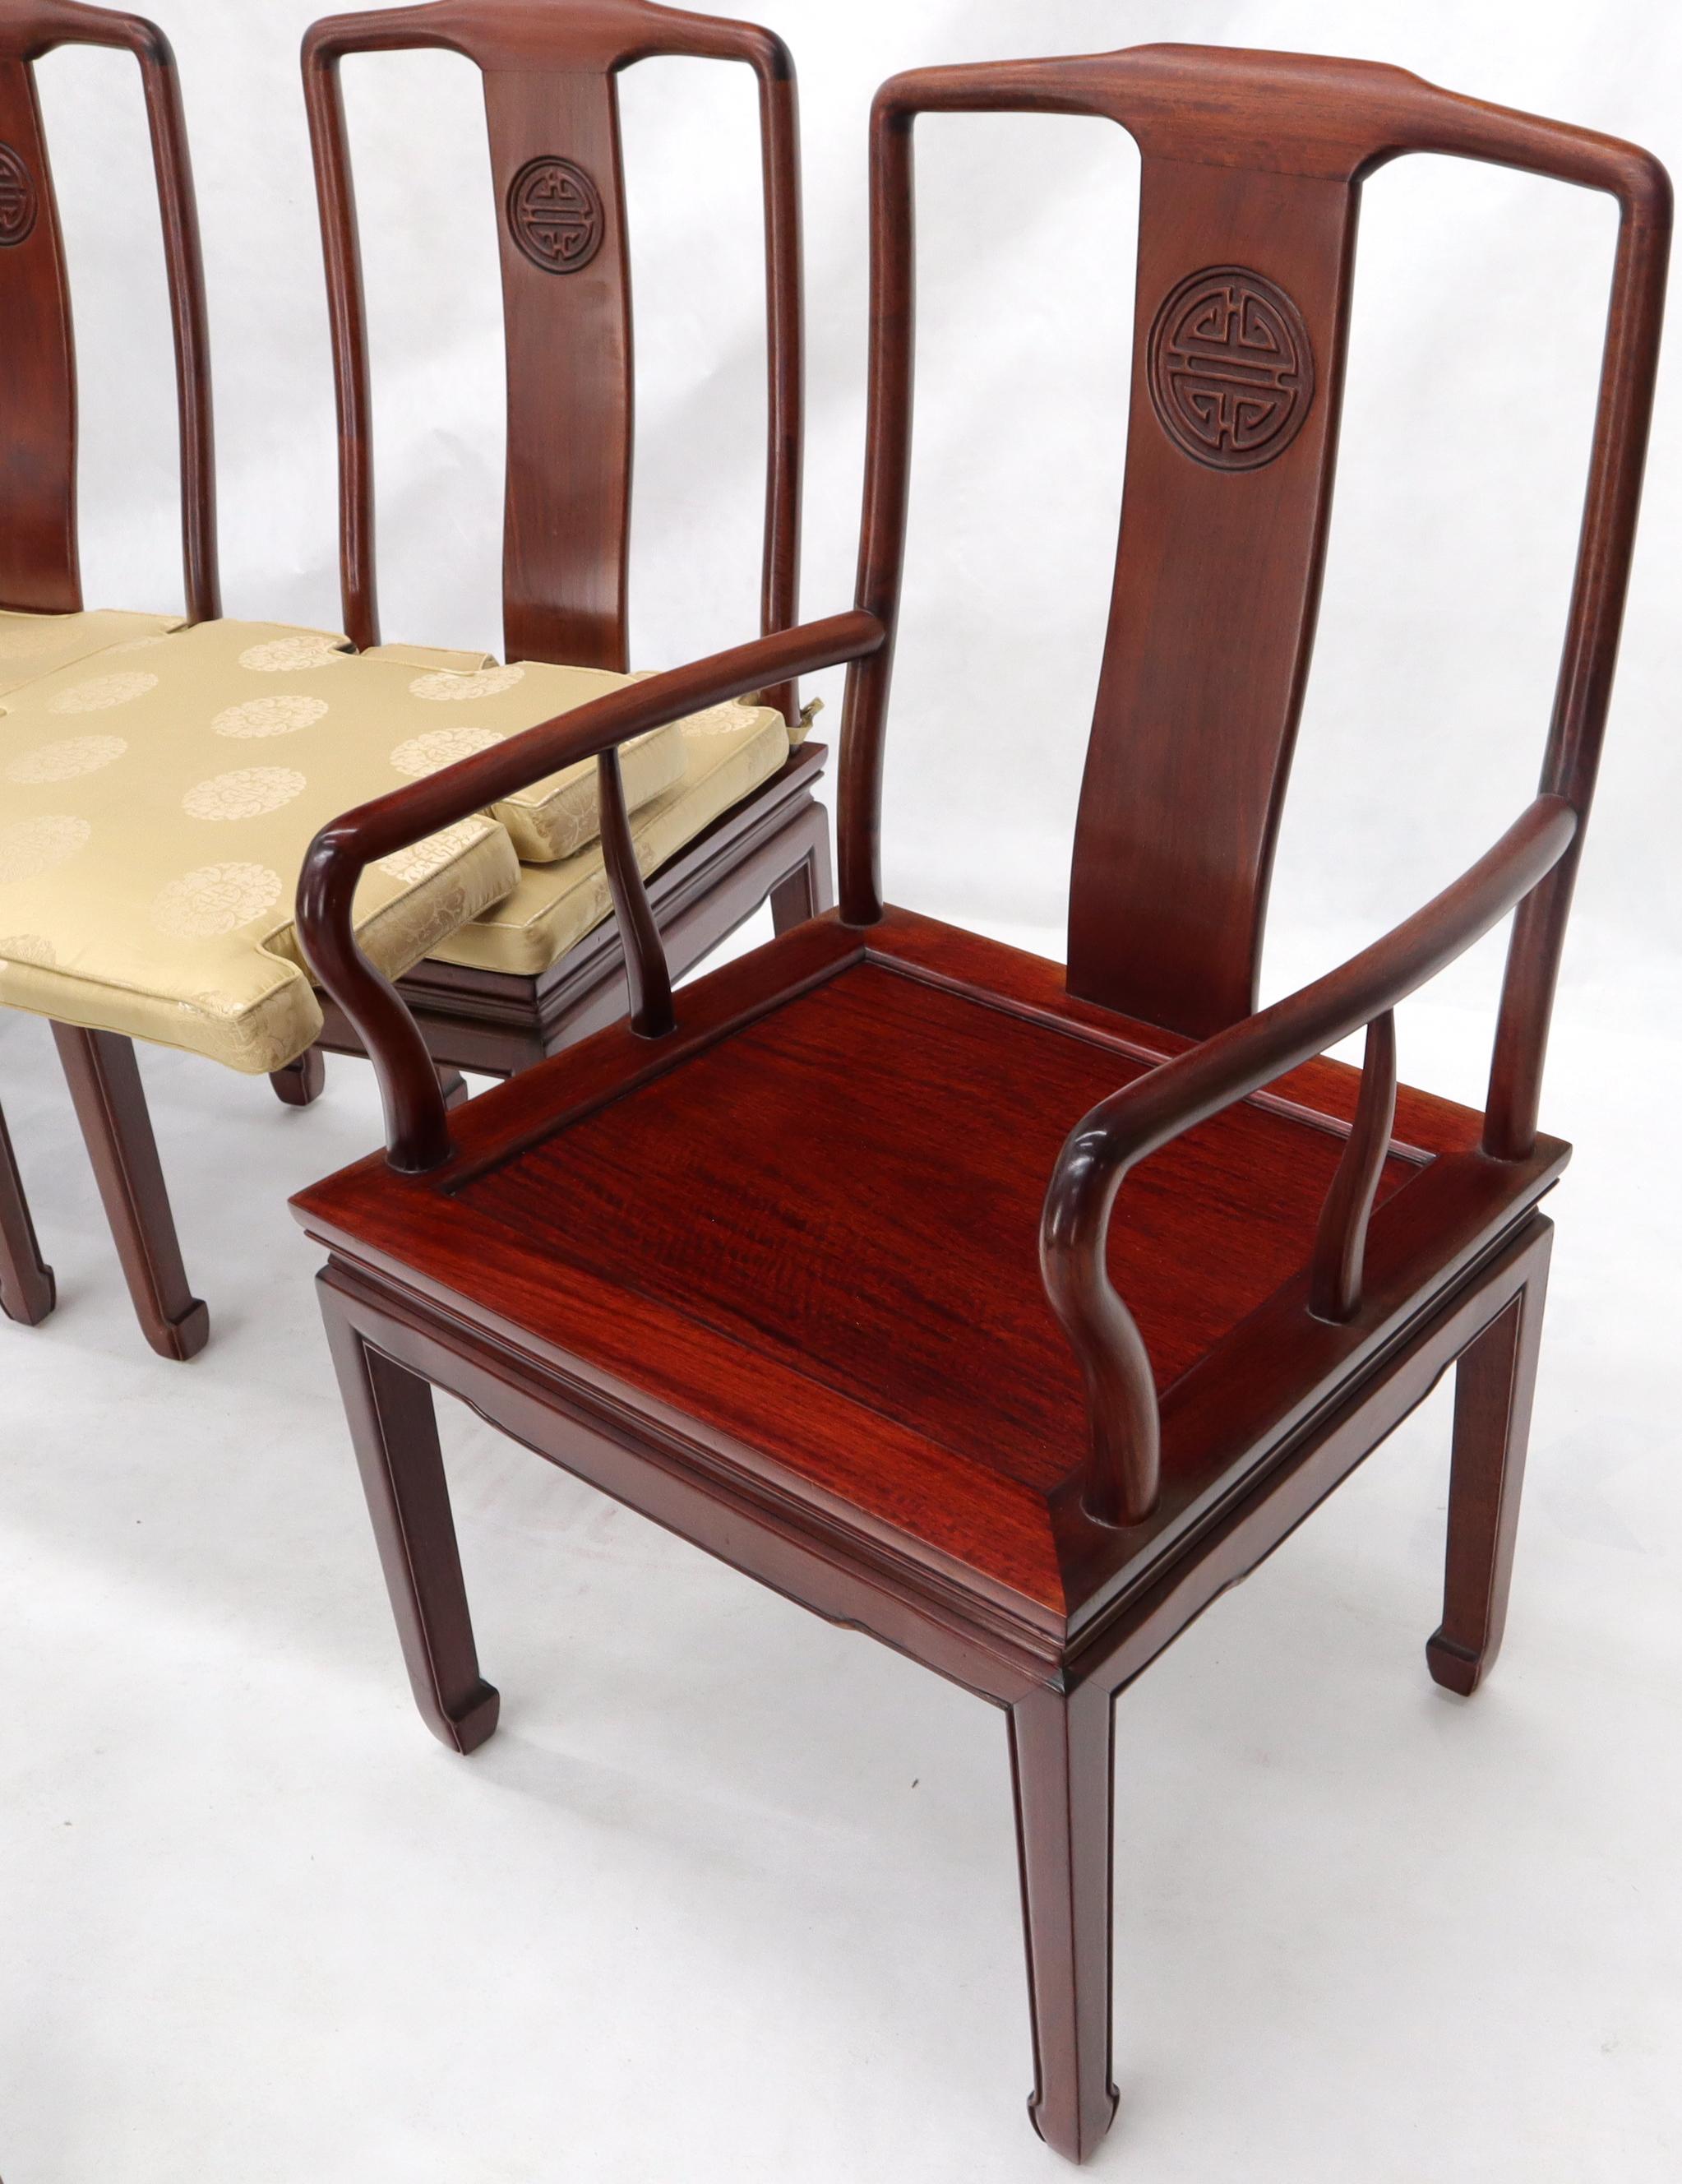 Set of 8 Asian Mid-Century Modern decor fit dining chairs in solid rosewood. Rock-hard study and solid chairs in excellent condition.